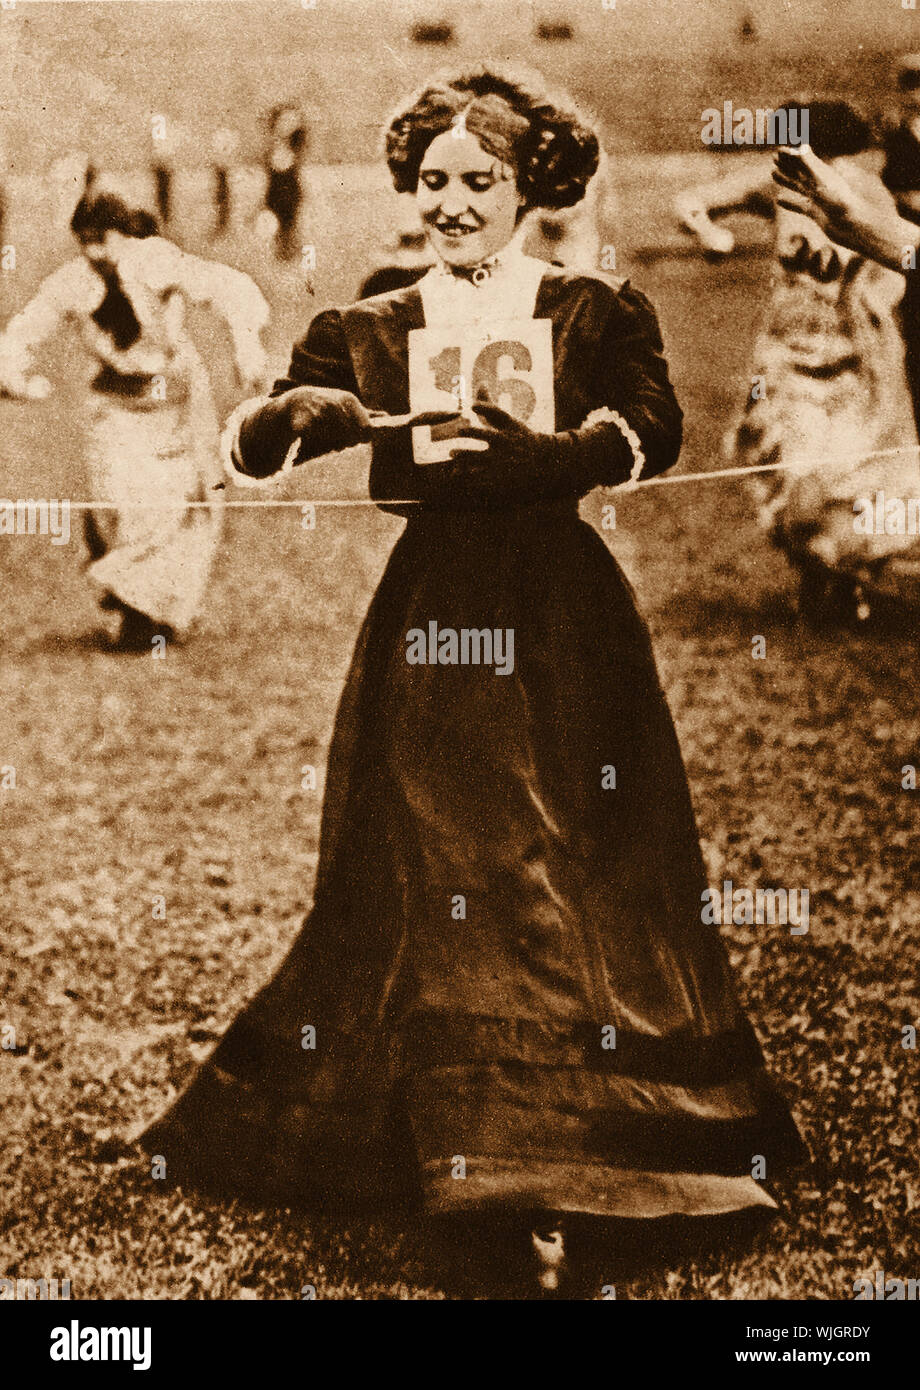 Women playing traditional sports in 1911 - Egg and spoon race in la formal long dress Stock Photo